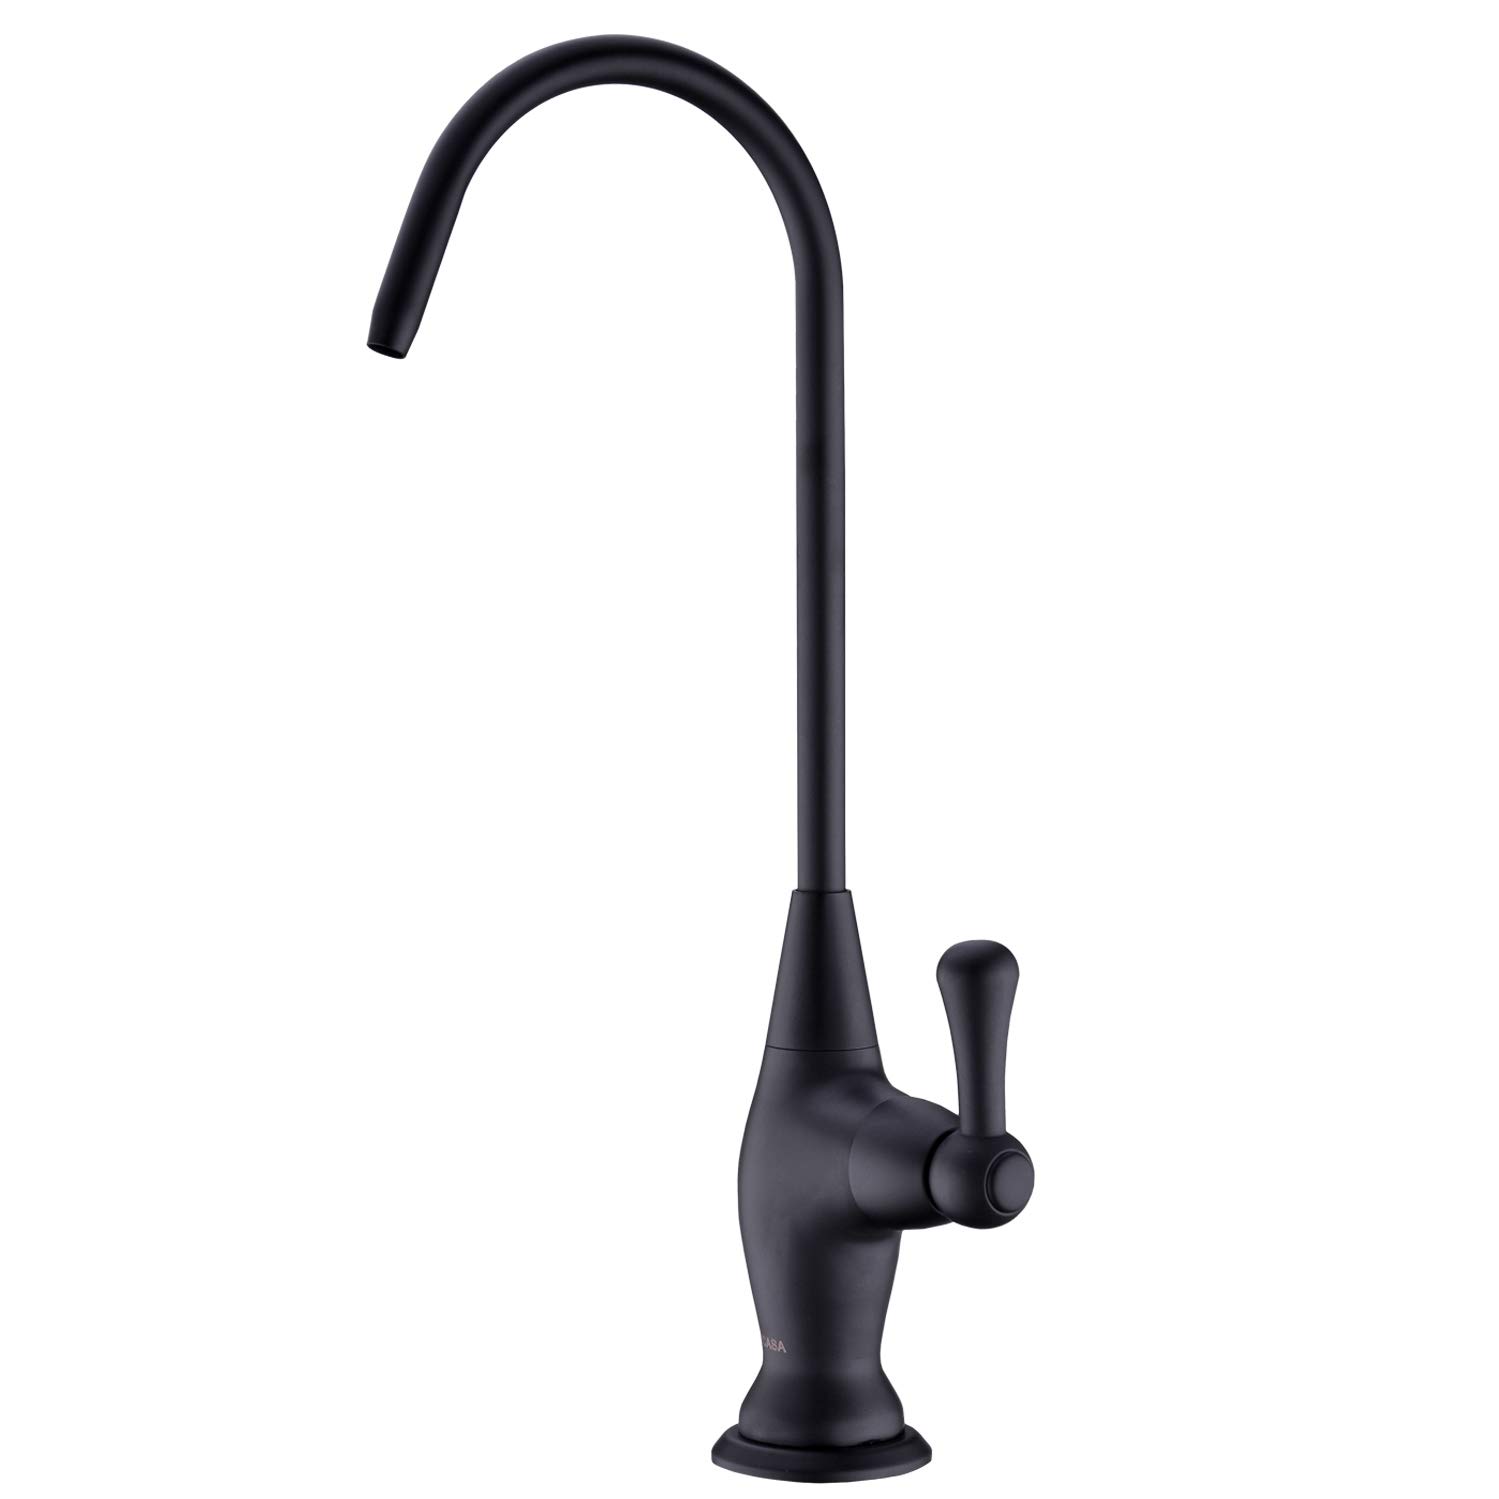 Gicasa Matte Black Water Filter Faucet, Non-Air-Gap 304 Stainless Steel Drinking Water Beverage Faucet For Reverse Osmosis Syste